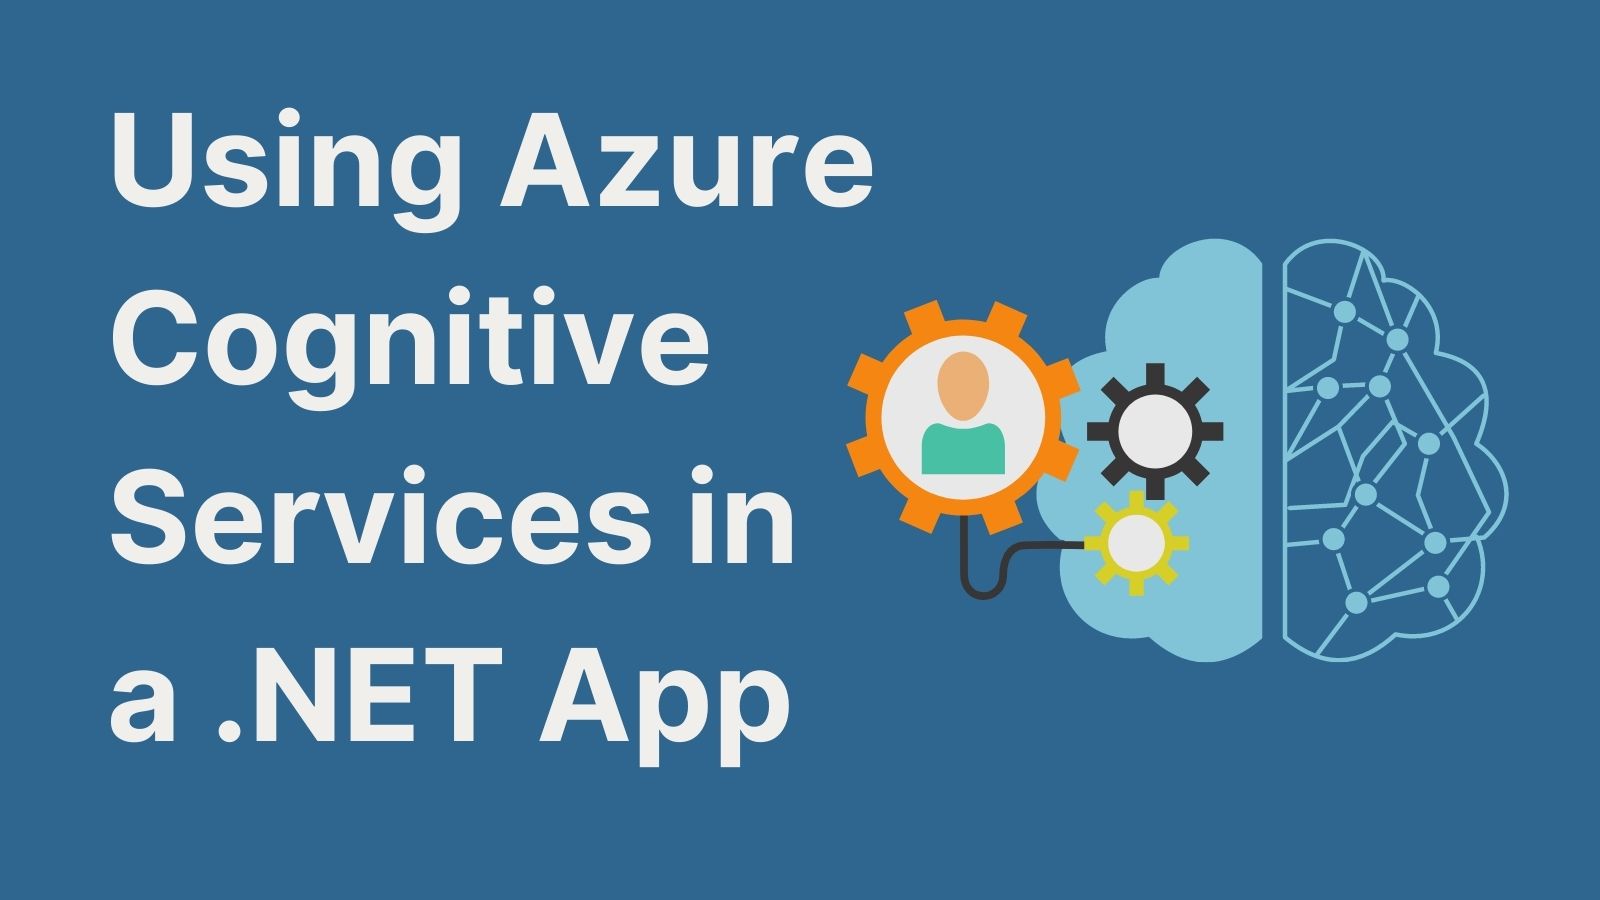 Using Azure Cognitive Services in a .NET App